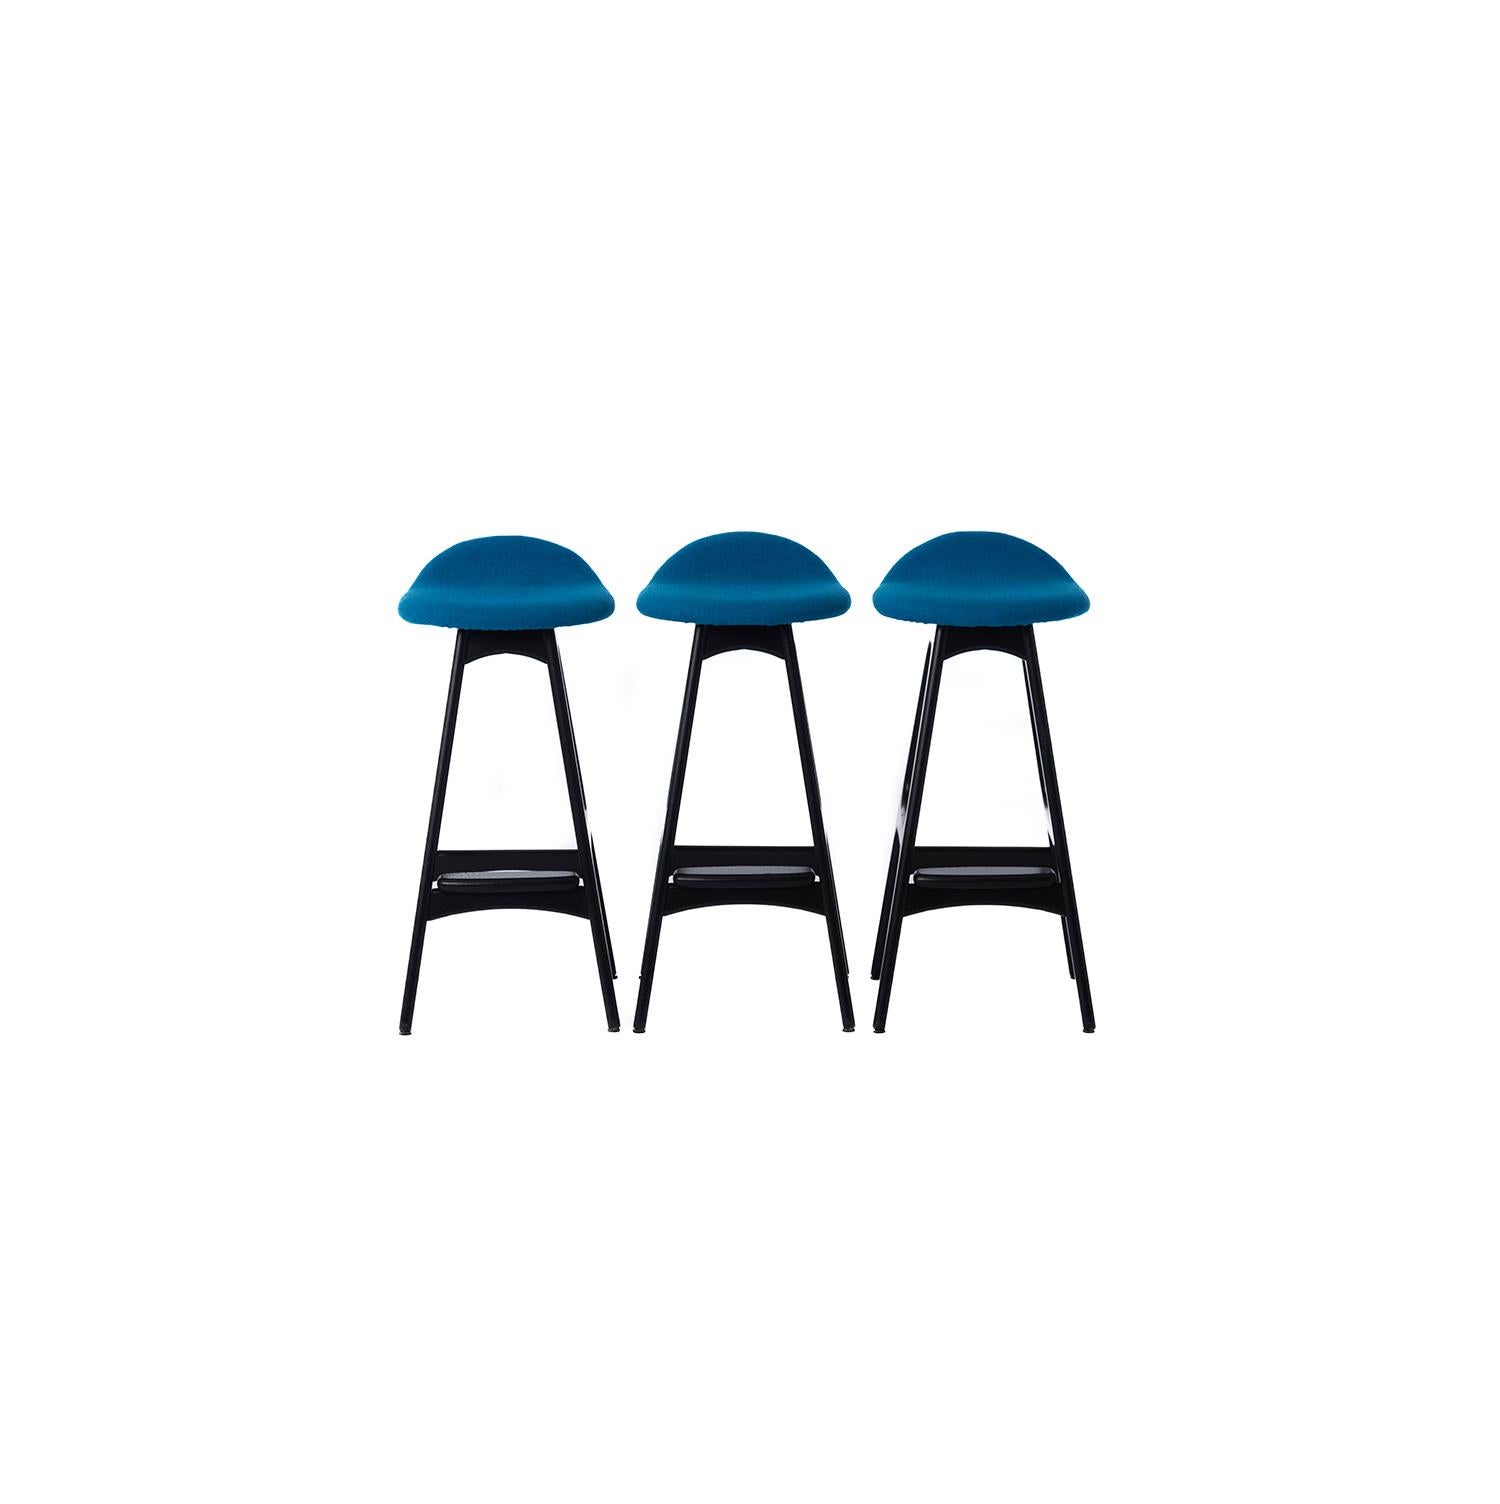 New ebonized Erik Buch stool with custom blue danish wool upholstery. Only 1 stool available.

Professional, skilled furniture restoration is an integral part of what we do every day. Our goal is to provide beautiful, functional furniture that